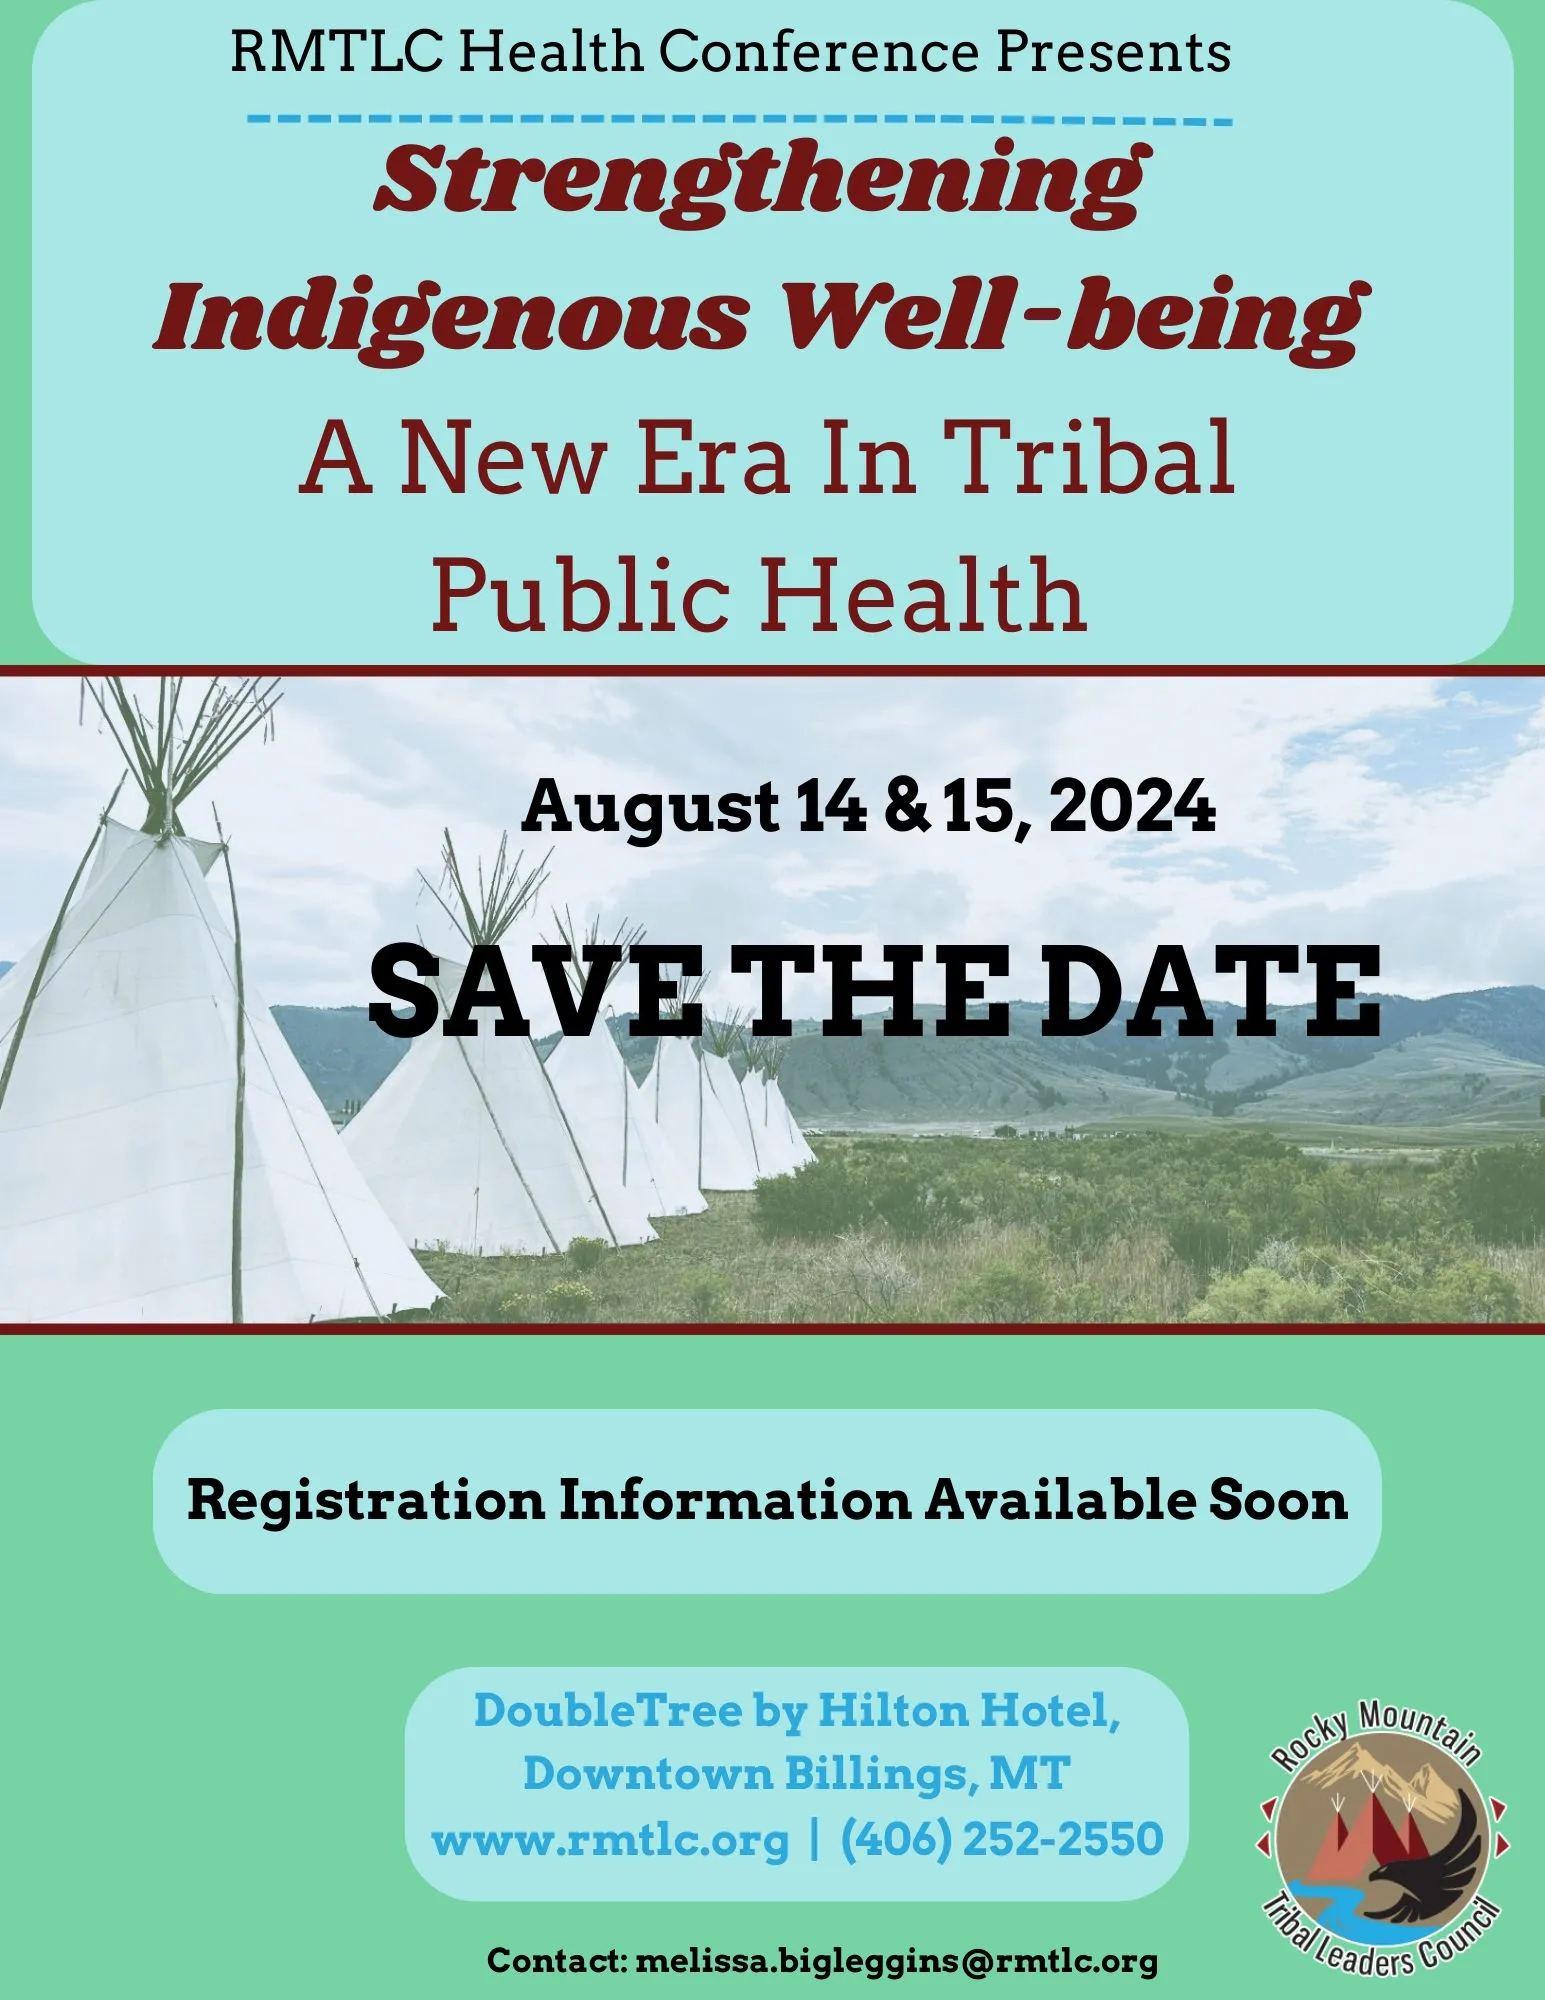 Save The Date 2024 RMTLC HEALTH CONFERENCE AUGUST 14 and 15